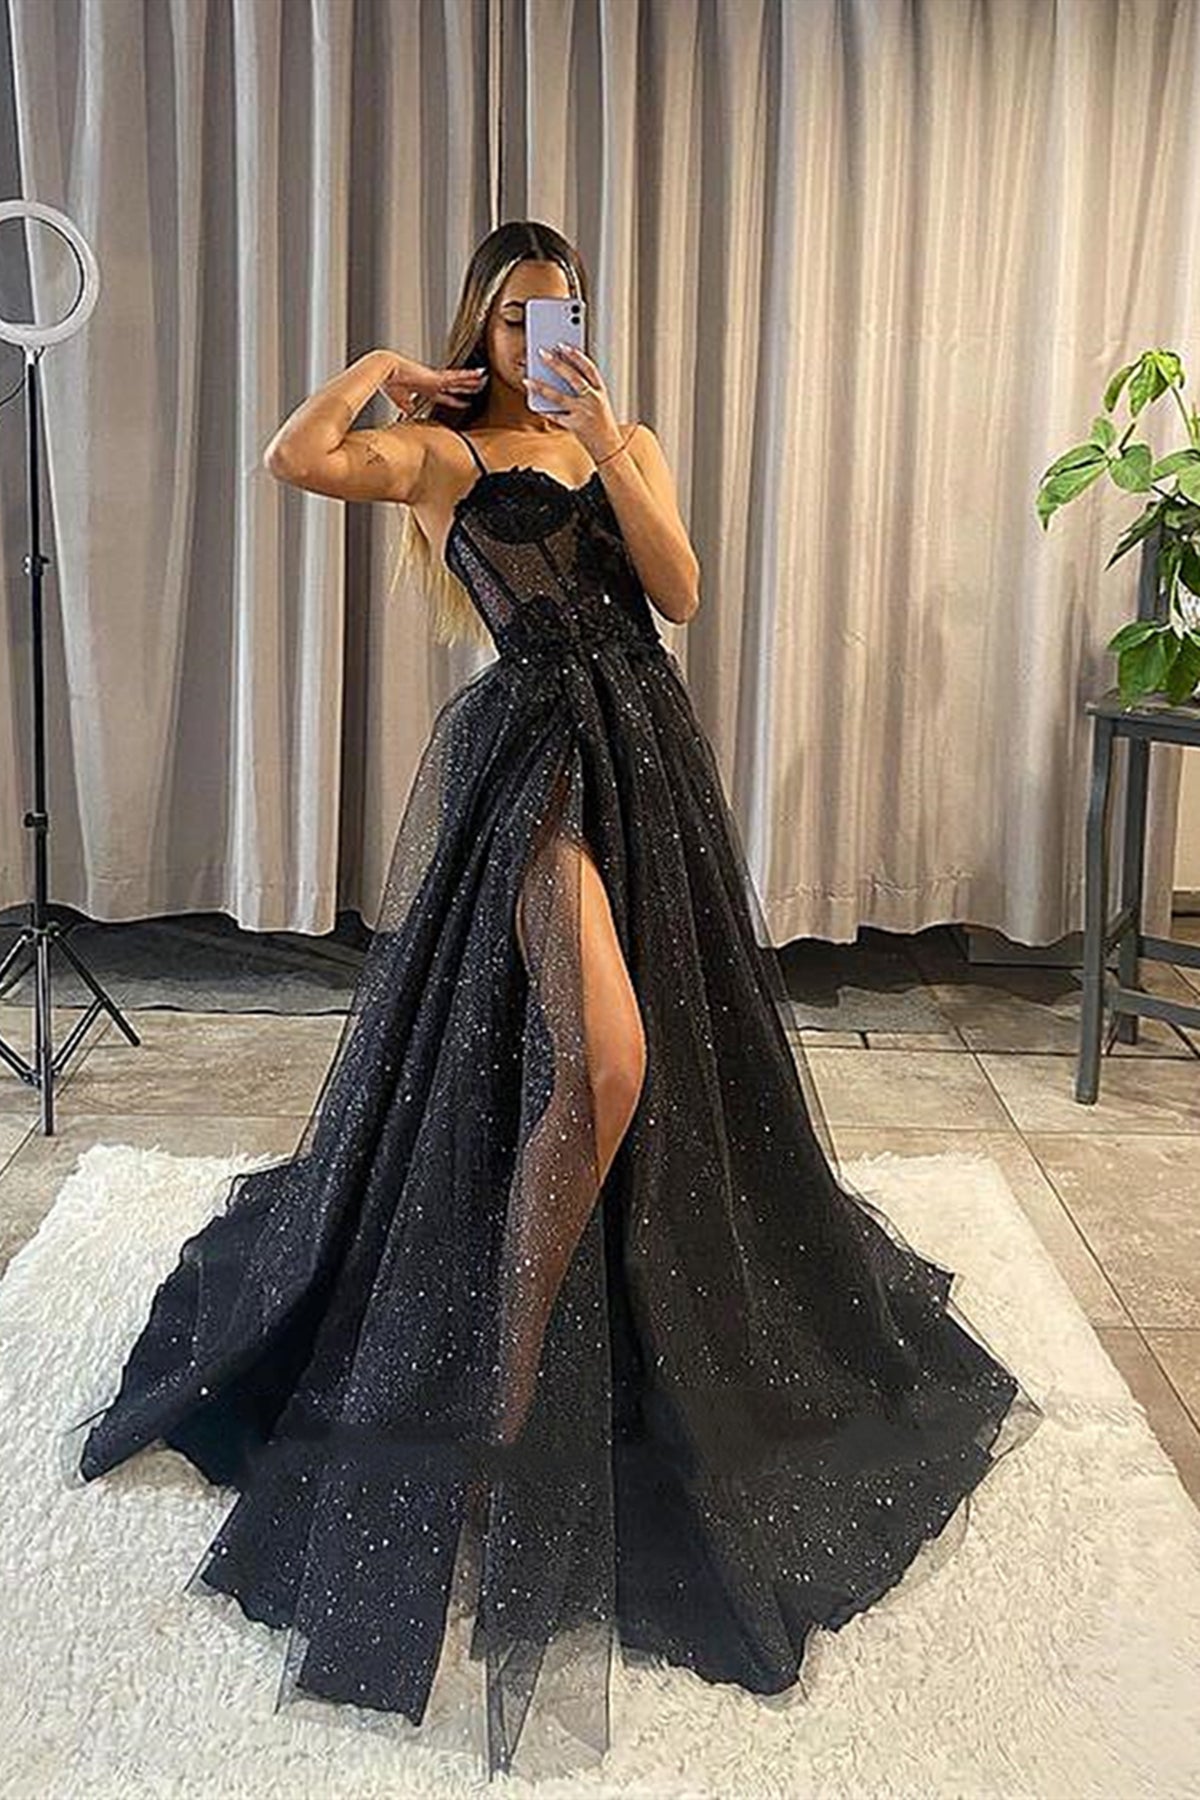 Royal Blue Black Long Ball Gown Modest Prom Dresses With Cap Sleeves  Vintage Short Sleeves Taffeta Seniors Puffy Prom Party Dresse340Z From  Langju22, $94.63 | DHgate.Com